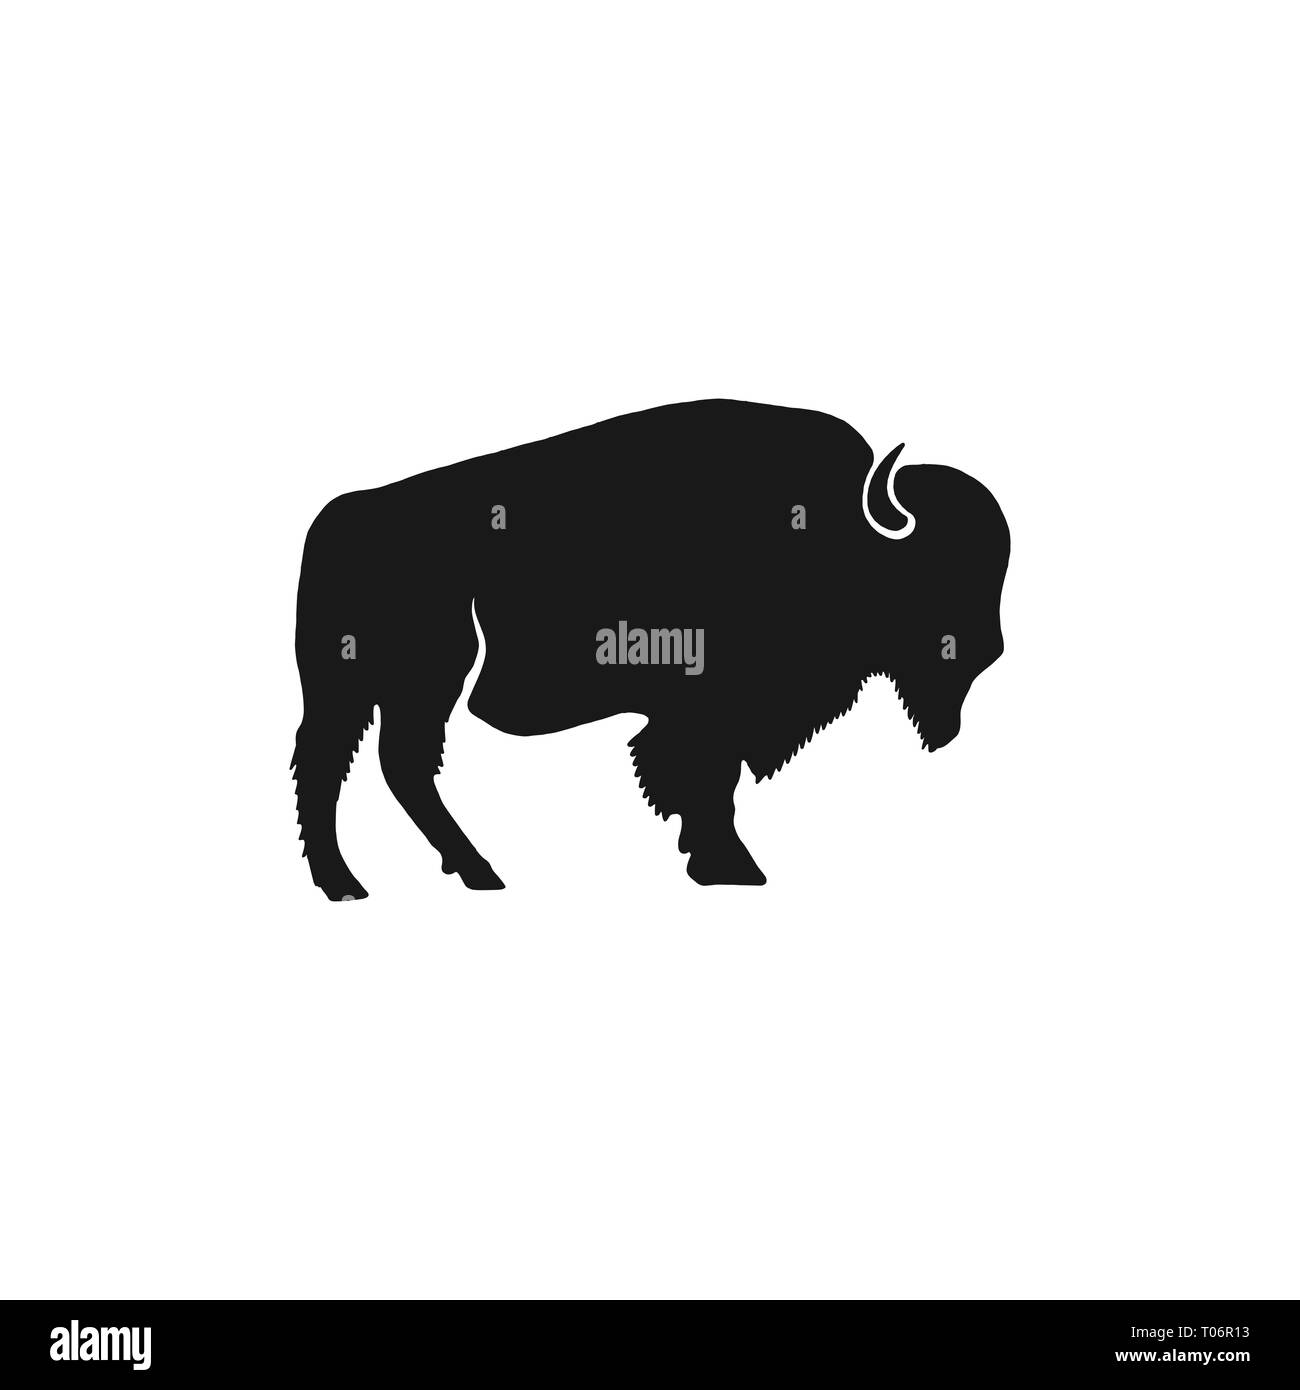 Buffalo icon silhouette. Retro effect. Bison black symbol pictogram isolated. Use for steak house logo, national park grill Stock Vector & Art - Alamy